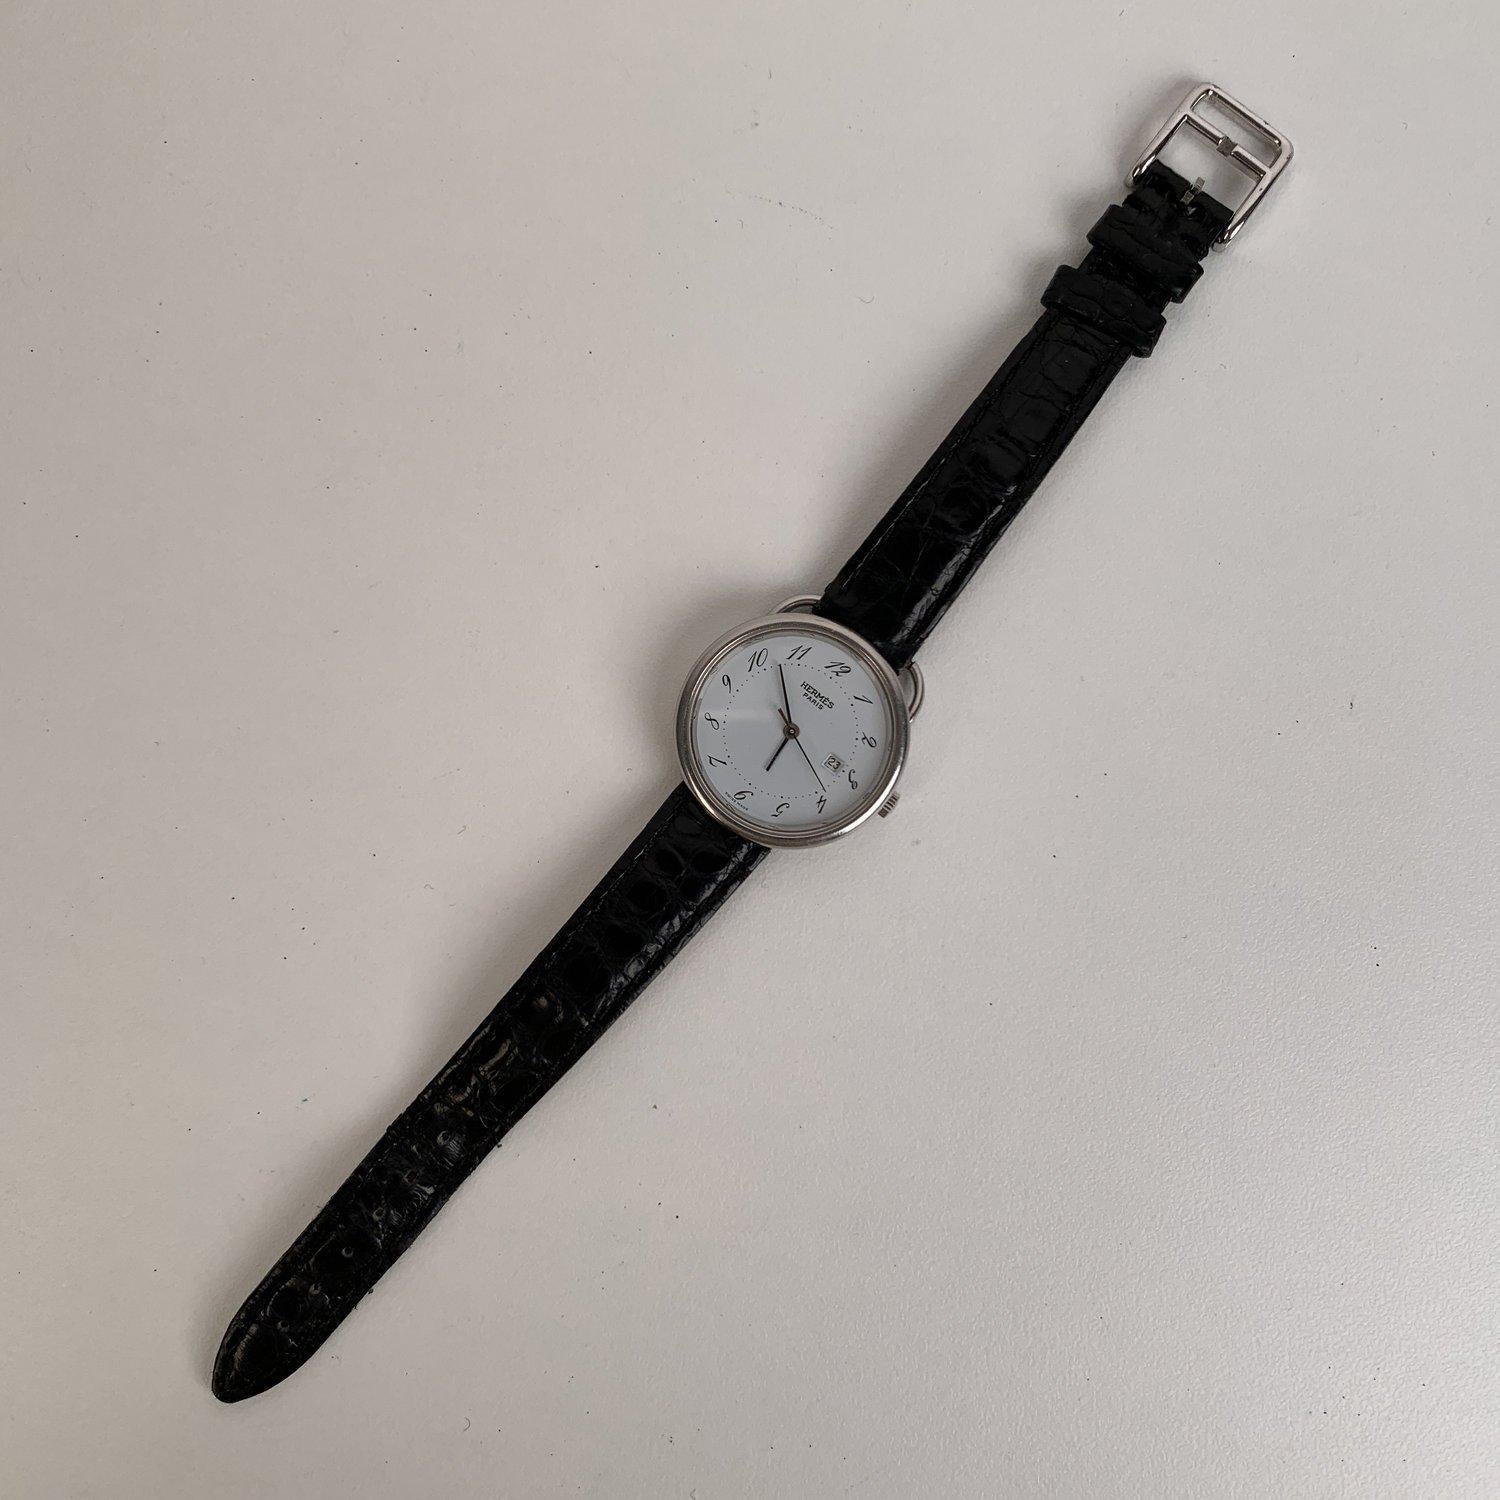 Description Timeless Hermes Vintage 'Arceau' silver-tone wrist watch with quartz movement. Swiss Made. Round stainless steel case. White dial with Arabic script numeral hour markers. Date at 3 o'clock. Sapphire crystal. Black crocodile leather wrist